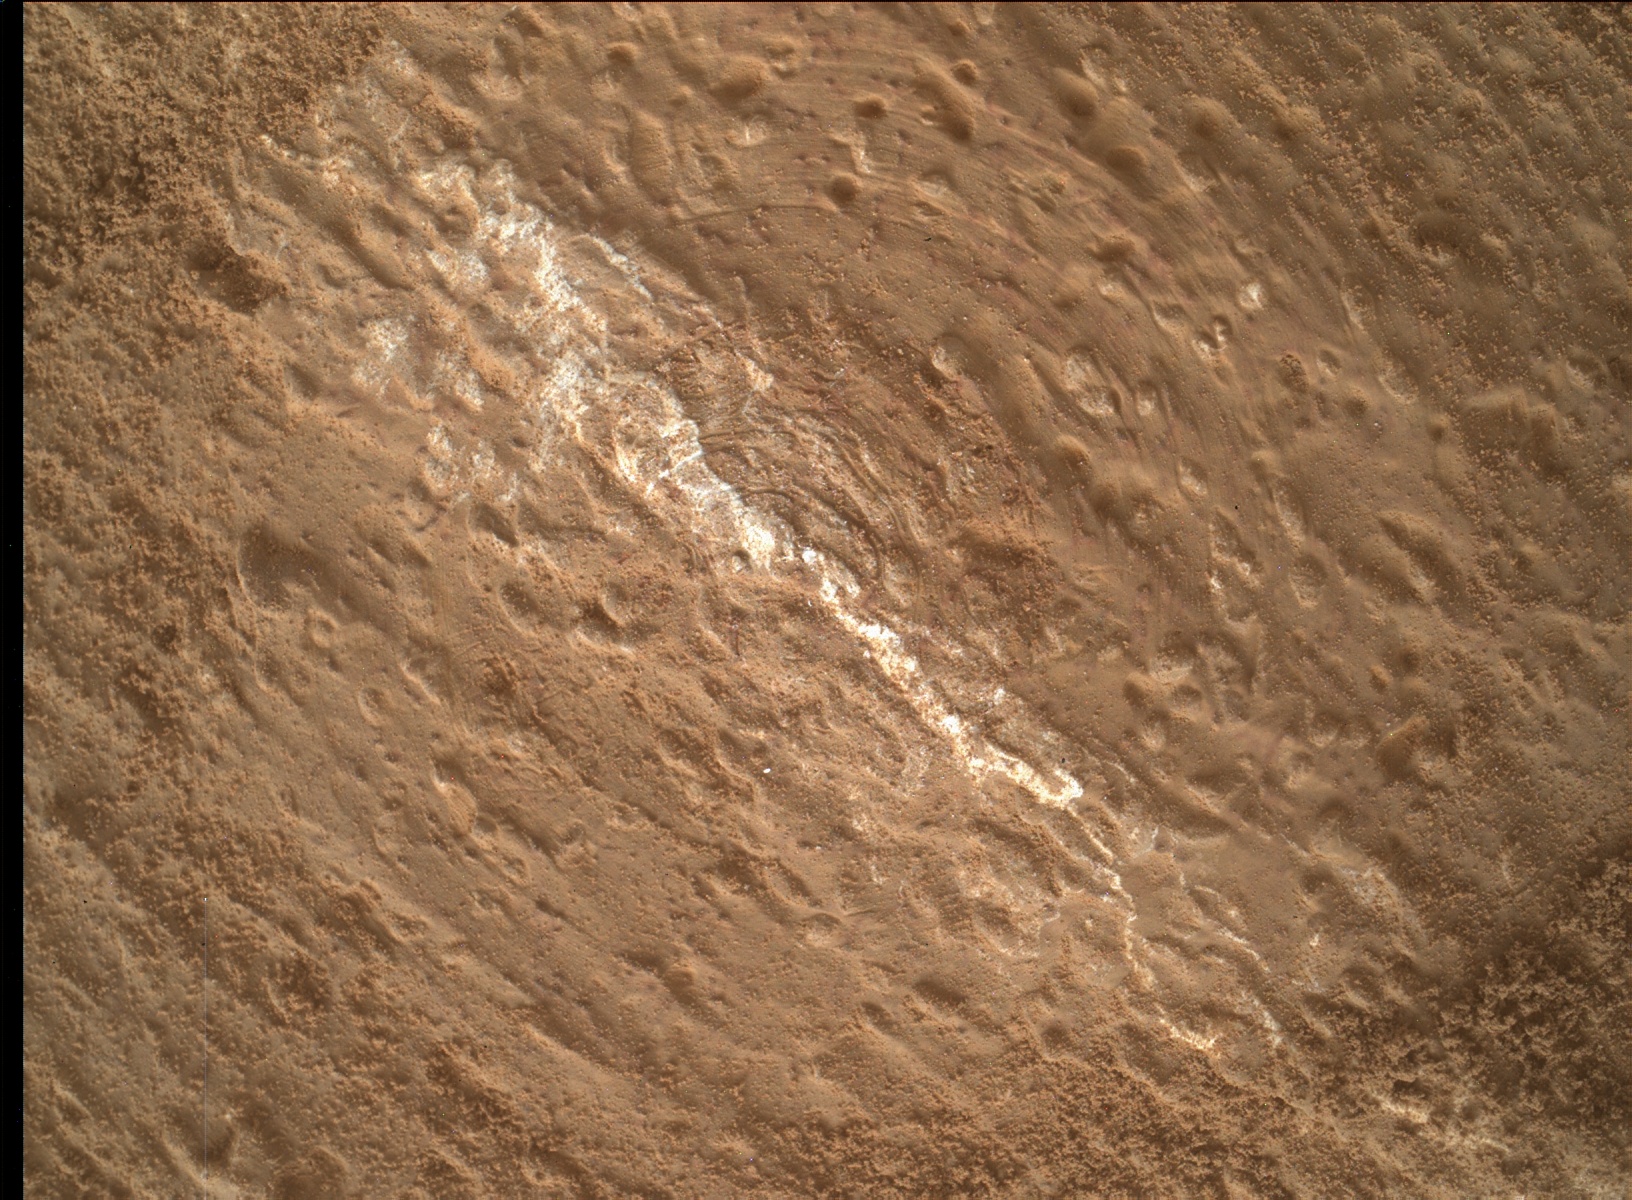 Nasa's Mars rover Curiosity acquired this image using its Mars Hand Lens Imager (MAHLI) on Sol 3276